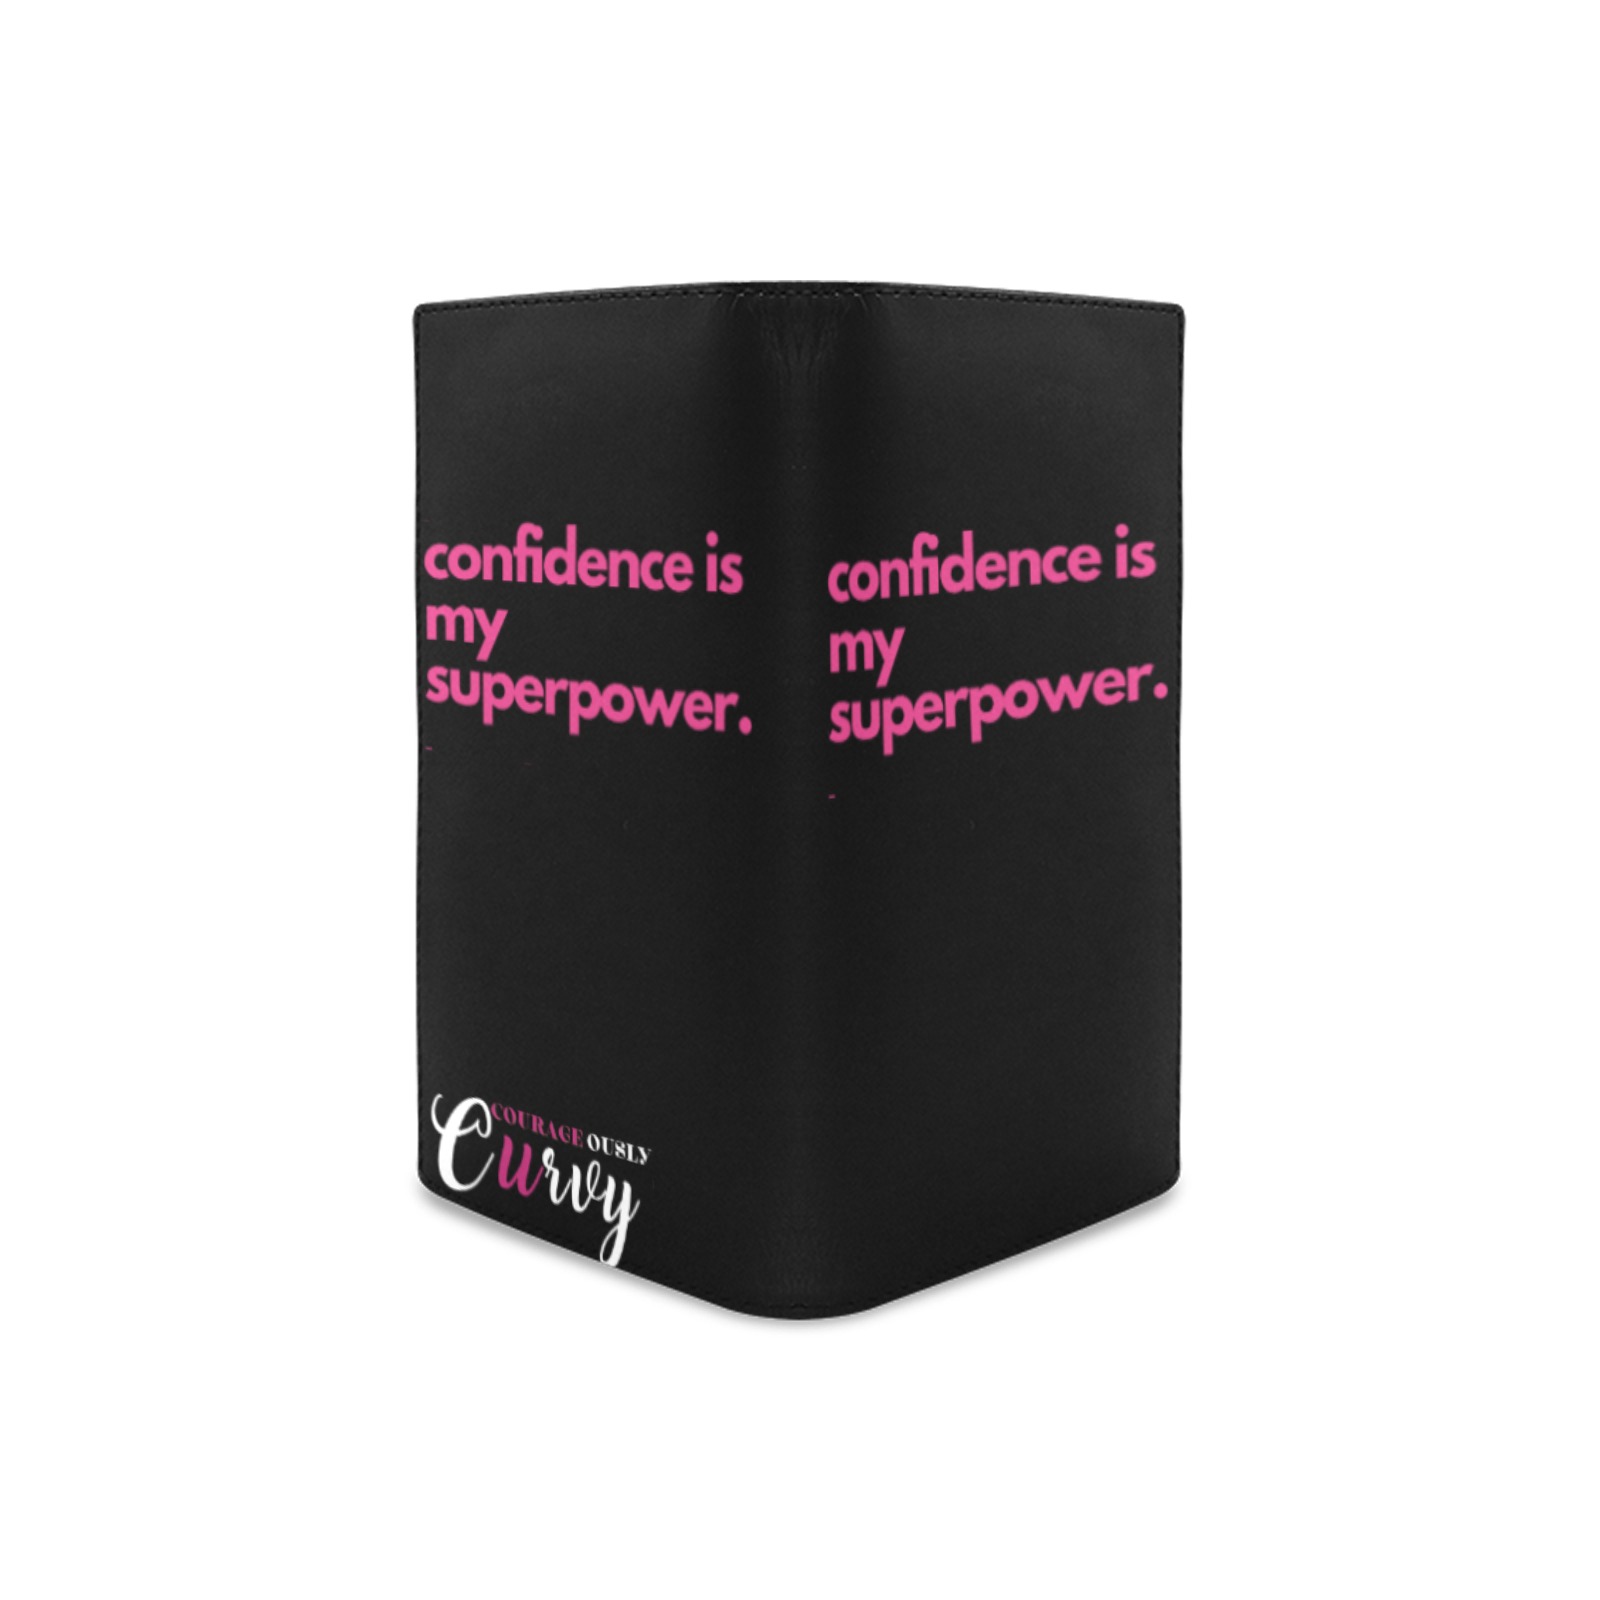 confidence is my superpower black Women's Leather Wallet (Model 1611)